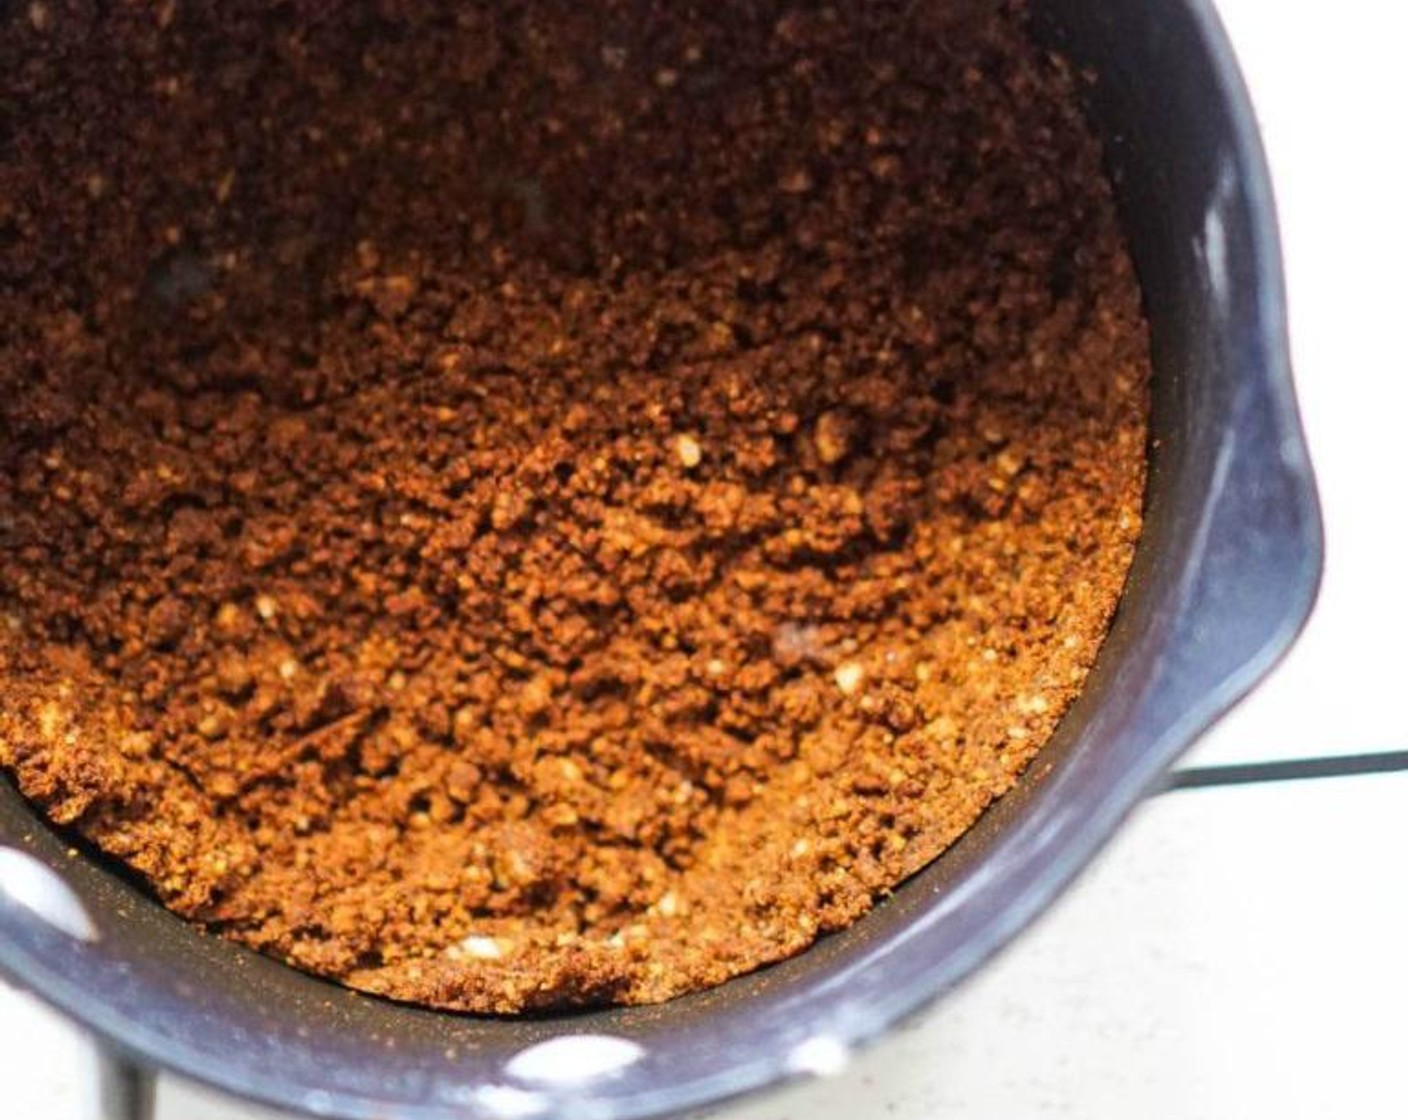 step 2 Add and mix the Chili Powder (2 Tbsp), Ground Cumin (1 tsp), McCormick® Garlic Powder (1 tsp), Ground Black Pepper (1/2 tsp), Cayenne Pepper (1/4 tsp). Allow the seasonings to toast for 1-2 minutes.